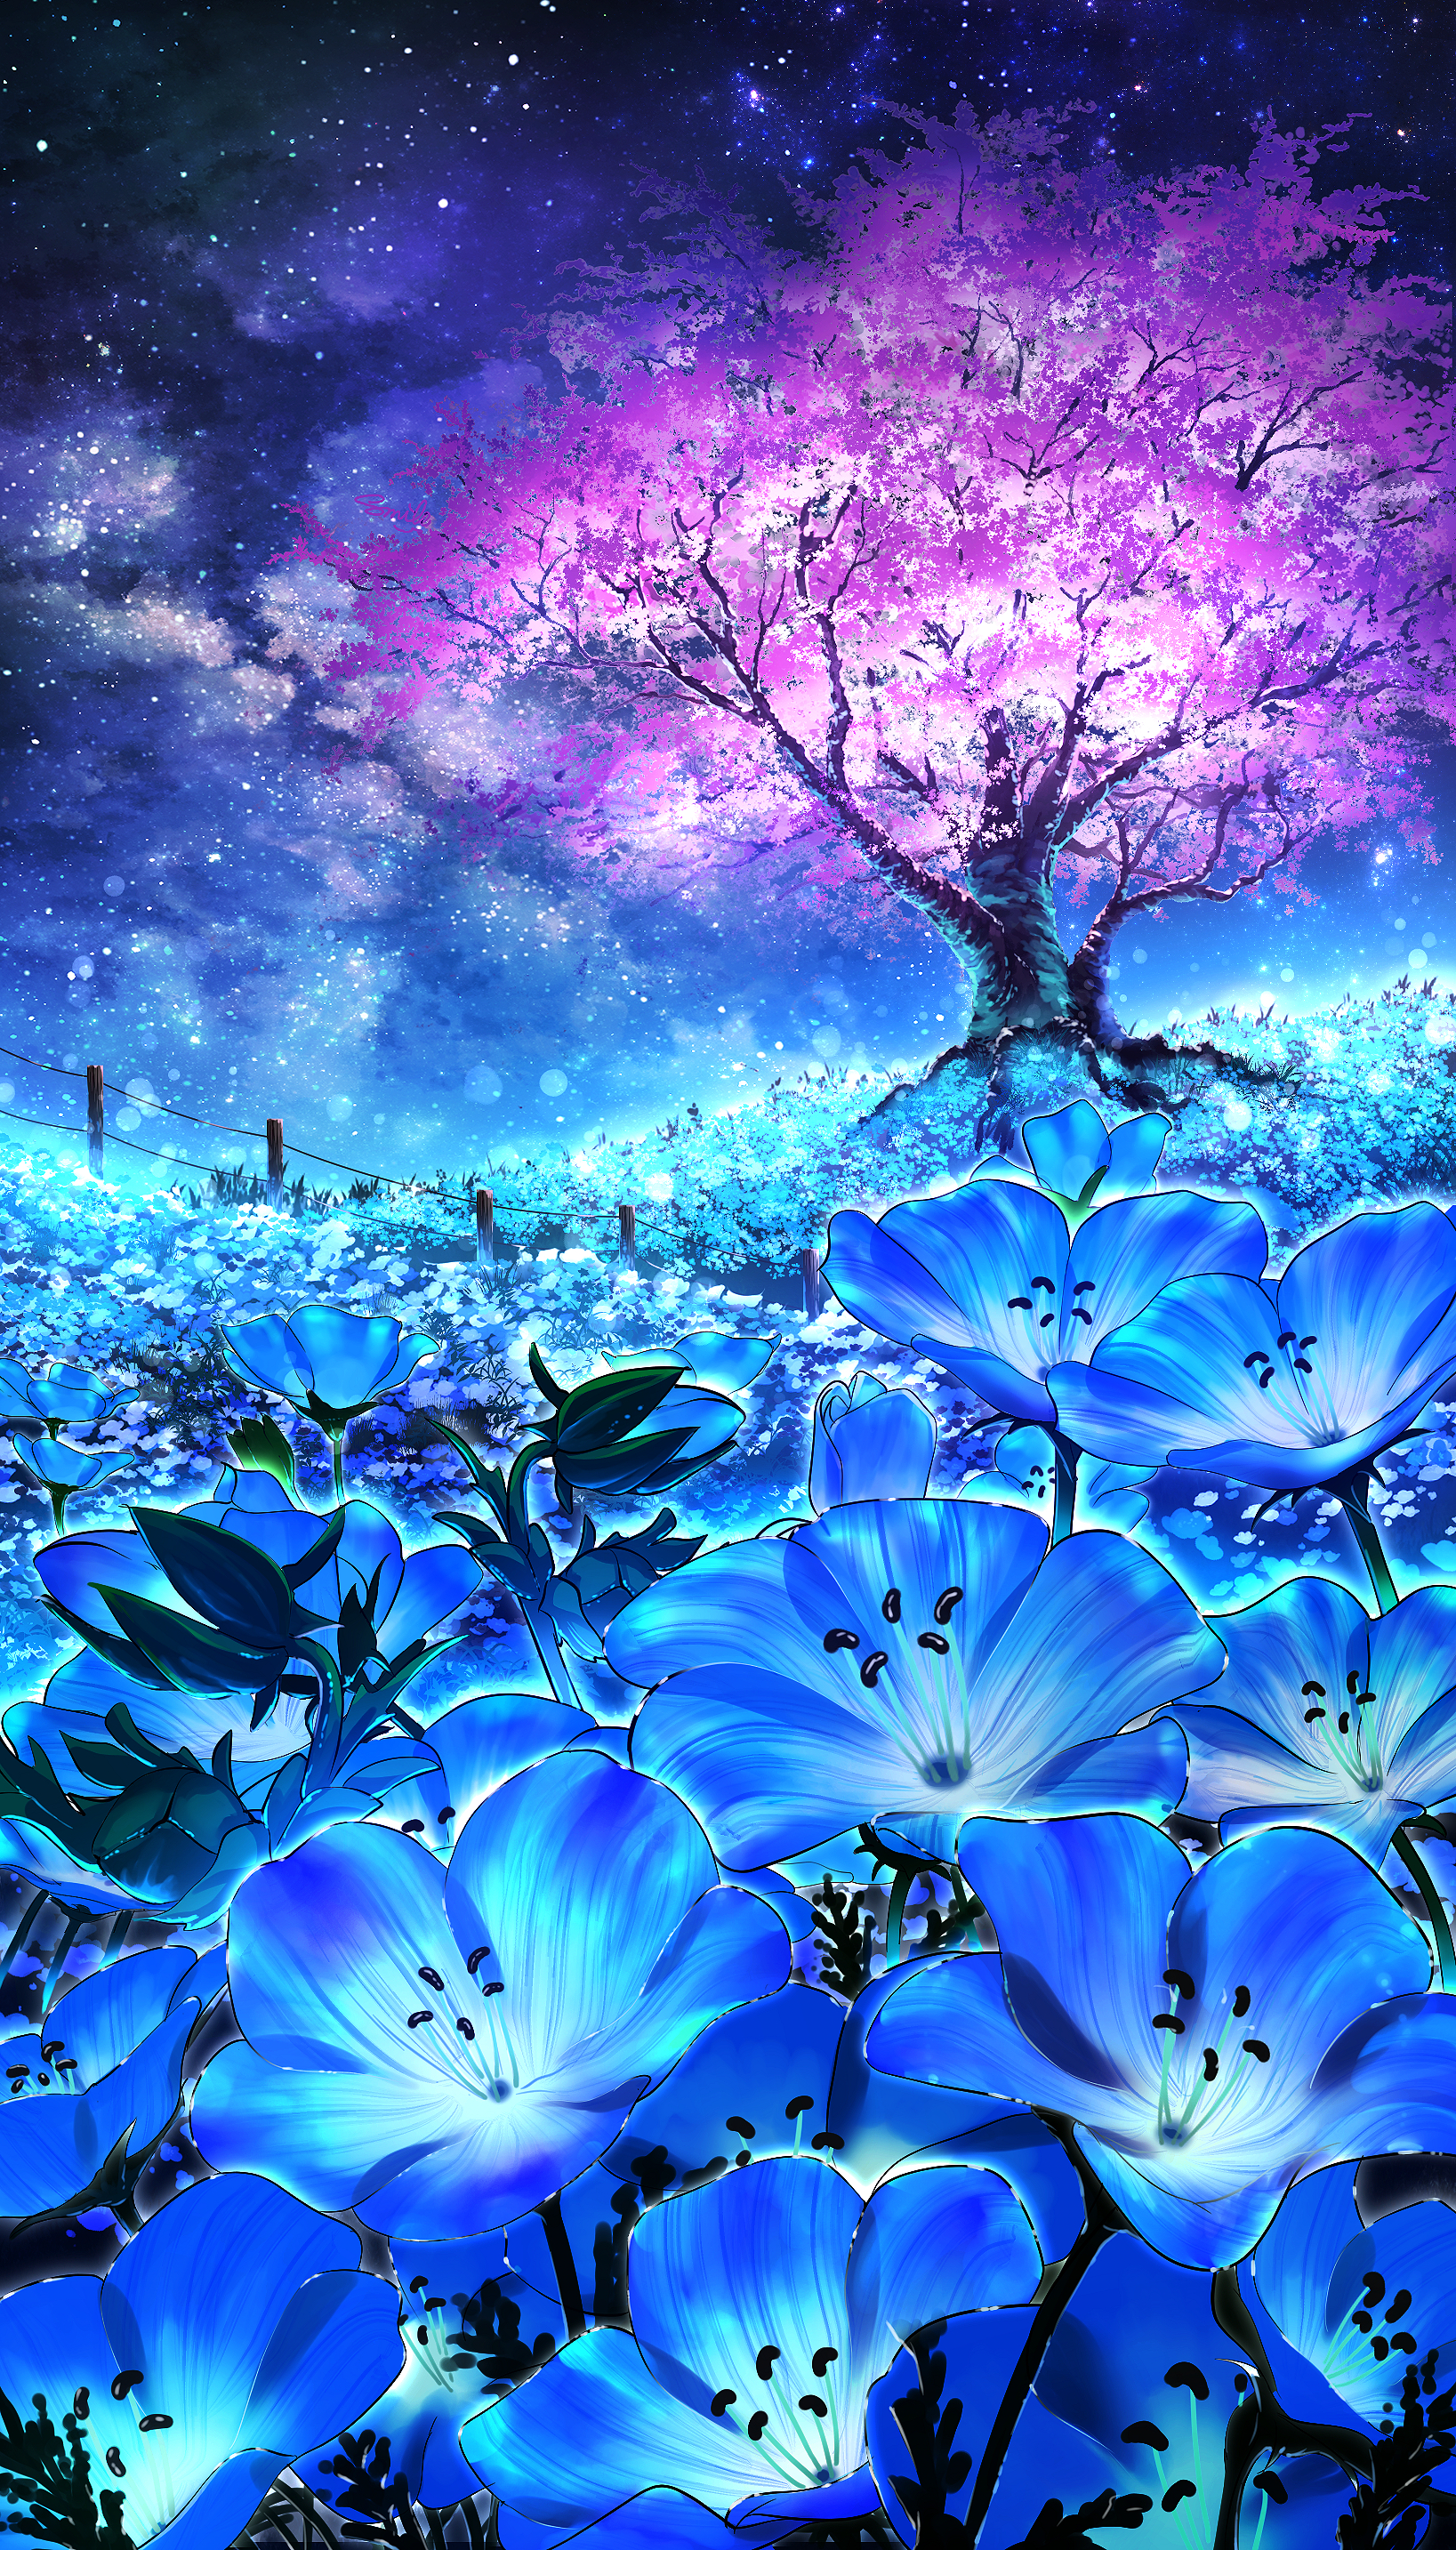 Anime 1637x2867 portrait display flowers starry night starred sky blue flowers landscape stars night field cherry blossom fence grass trees sky nature Smile (artist) outdoors Milky Way galaxy depth of field